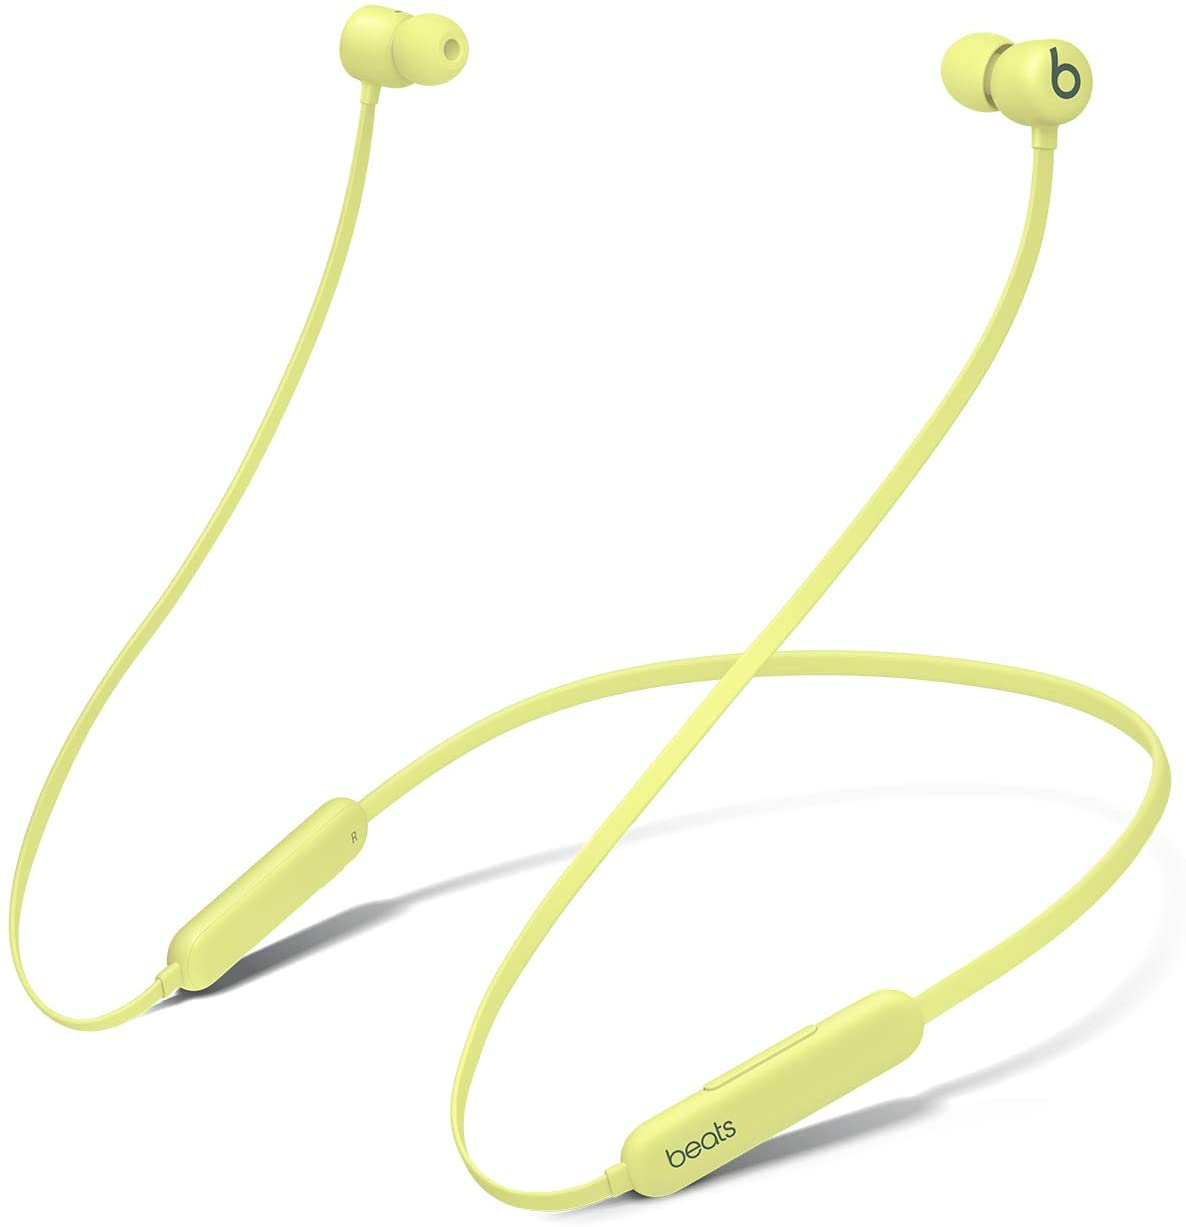 Beats Flex Wireless Portable Bluetooth Earbuds Built-in Microphone - Yuzu Yellow (Pre-Owned)